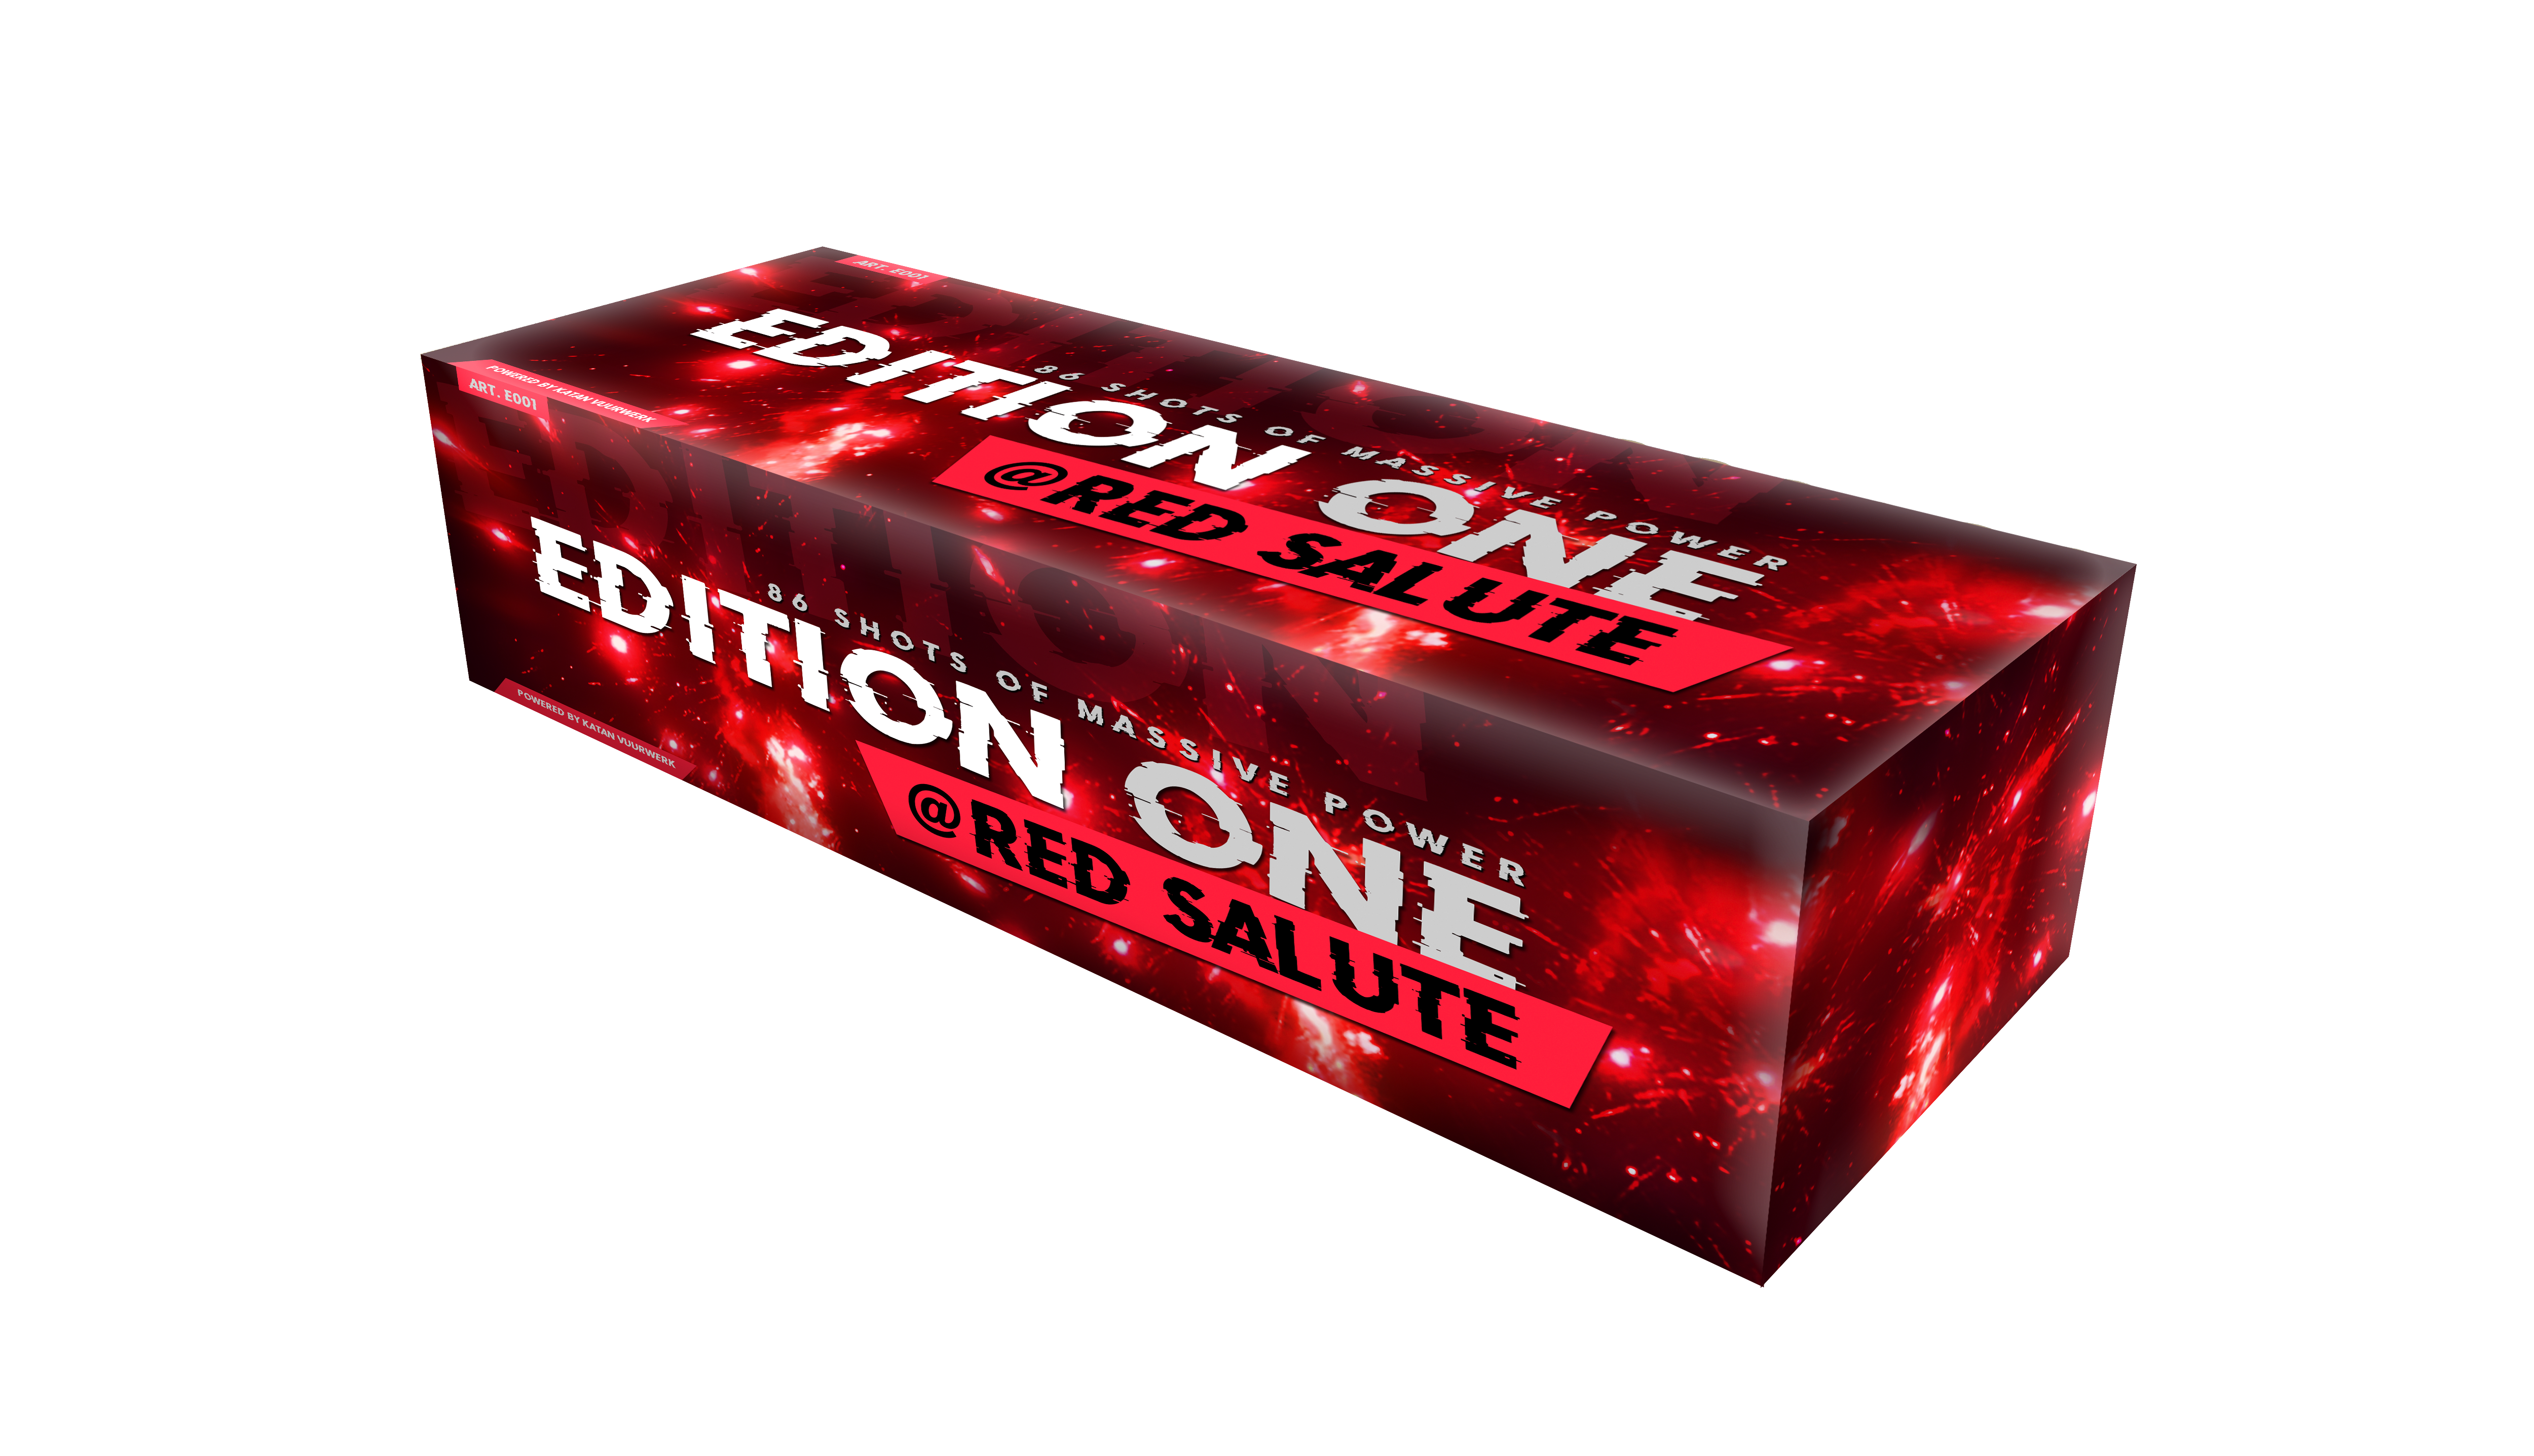 Edition One - Red salute